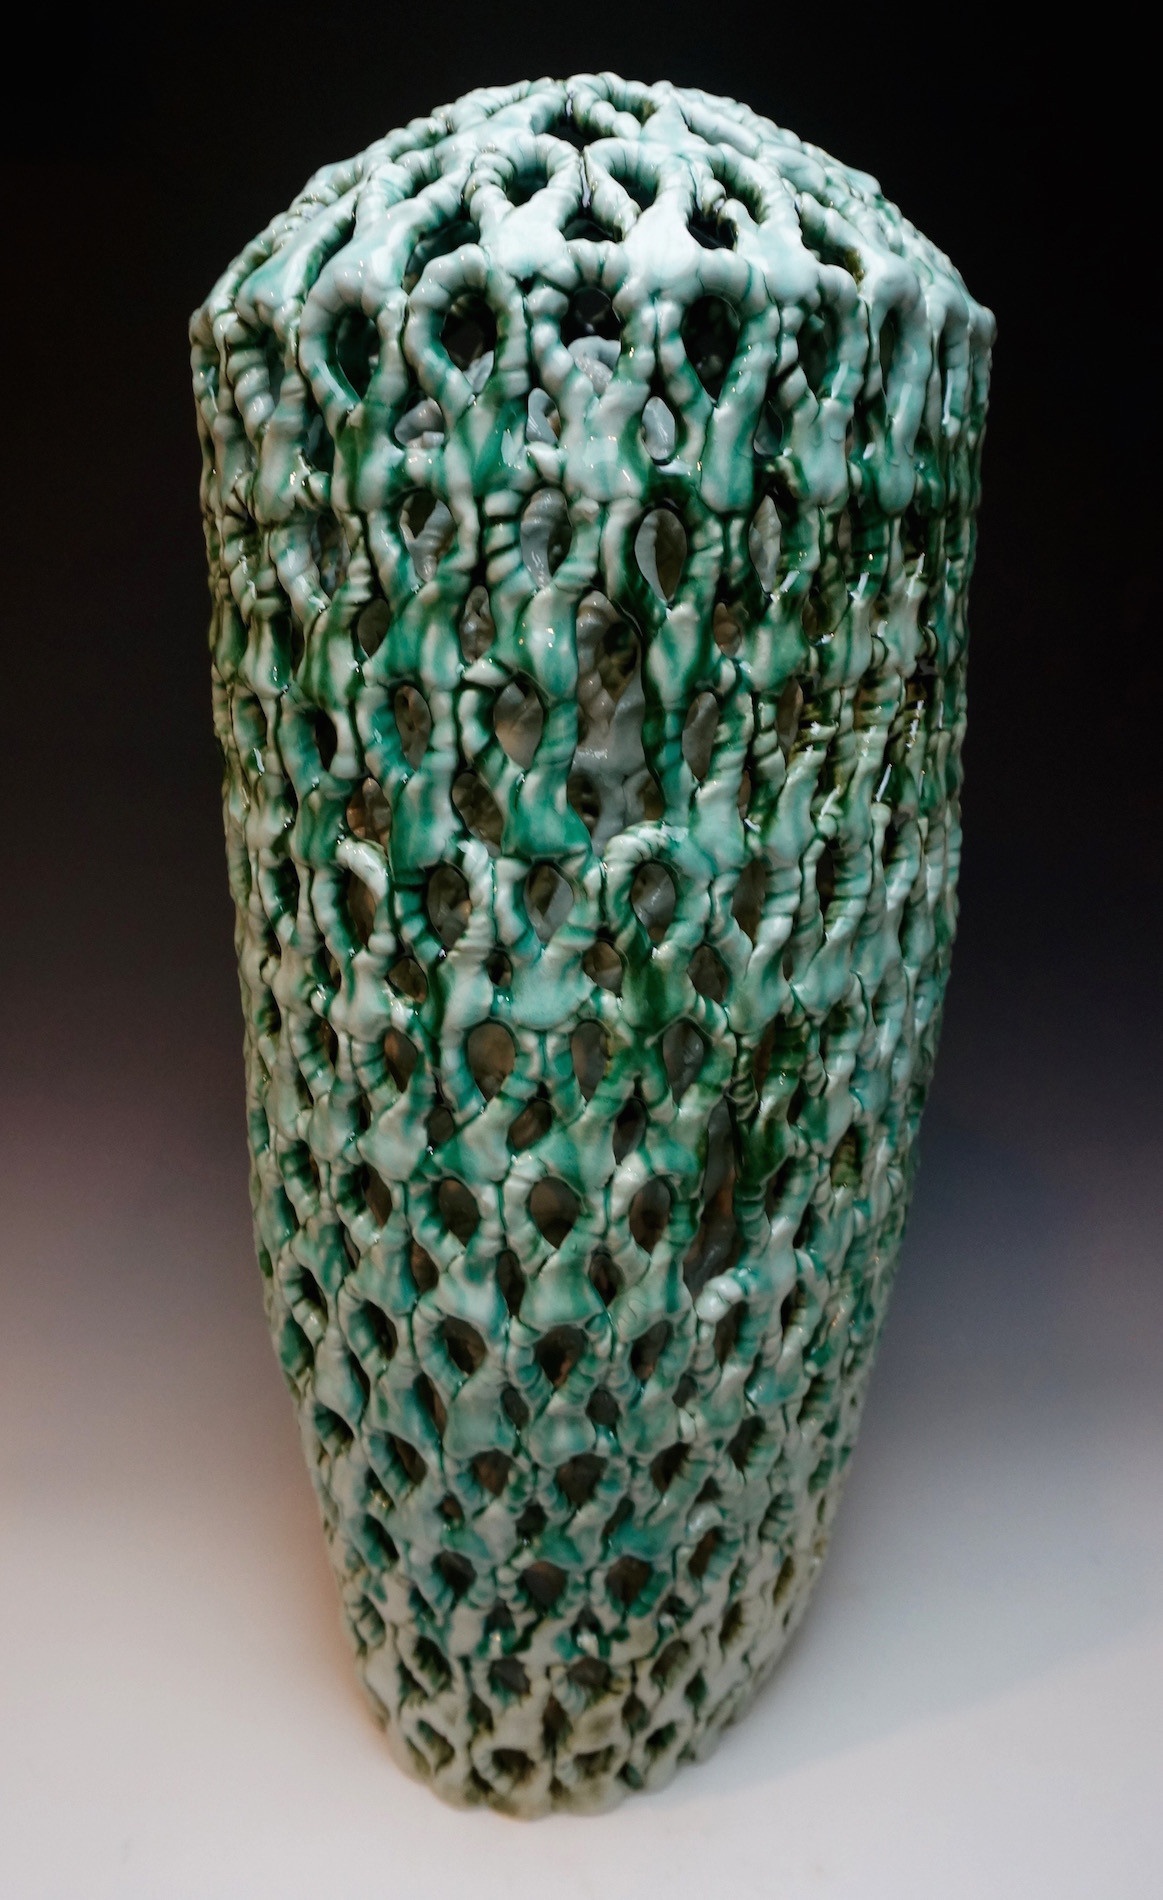 An intricately looped/patterned vessel, the top/mouth of it closed off — its surfaces are a vibrant emerald hue streaked with white.